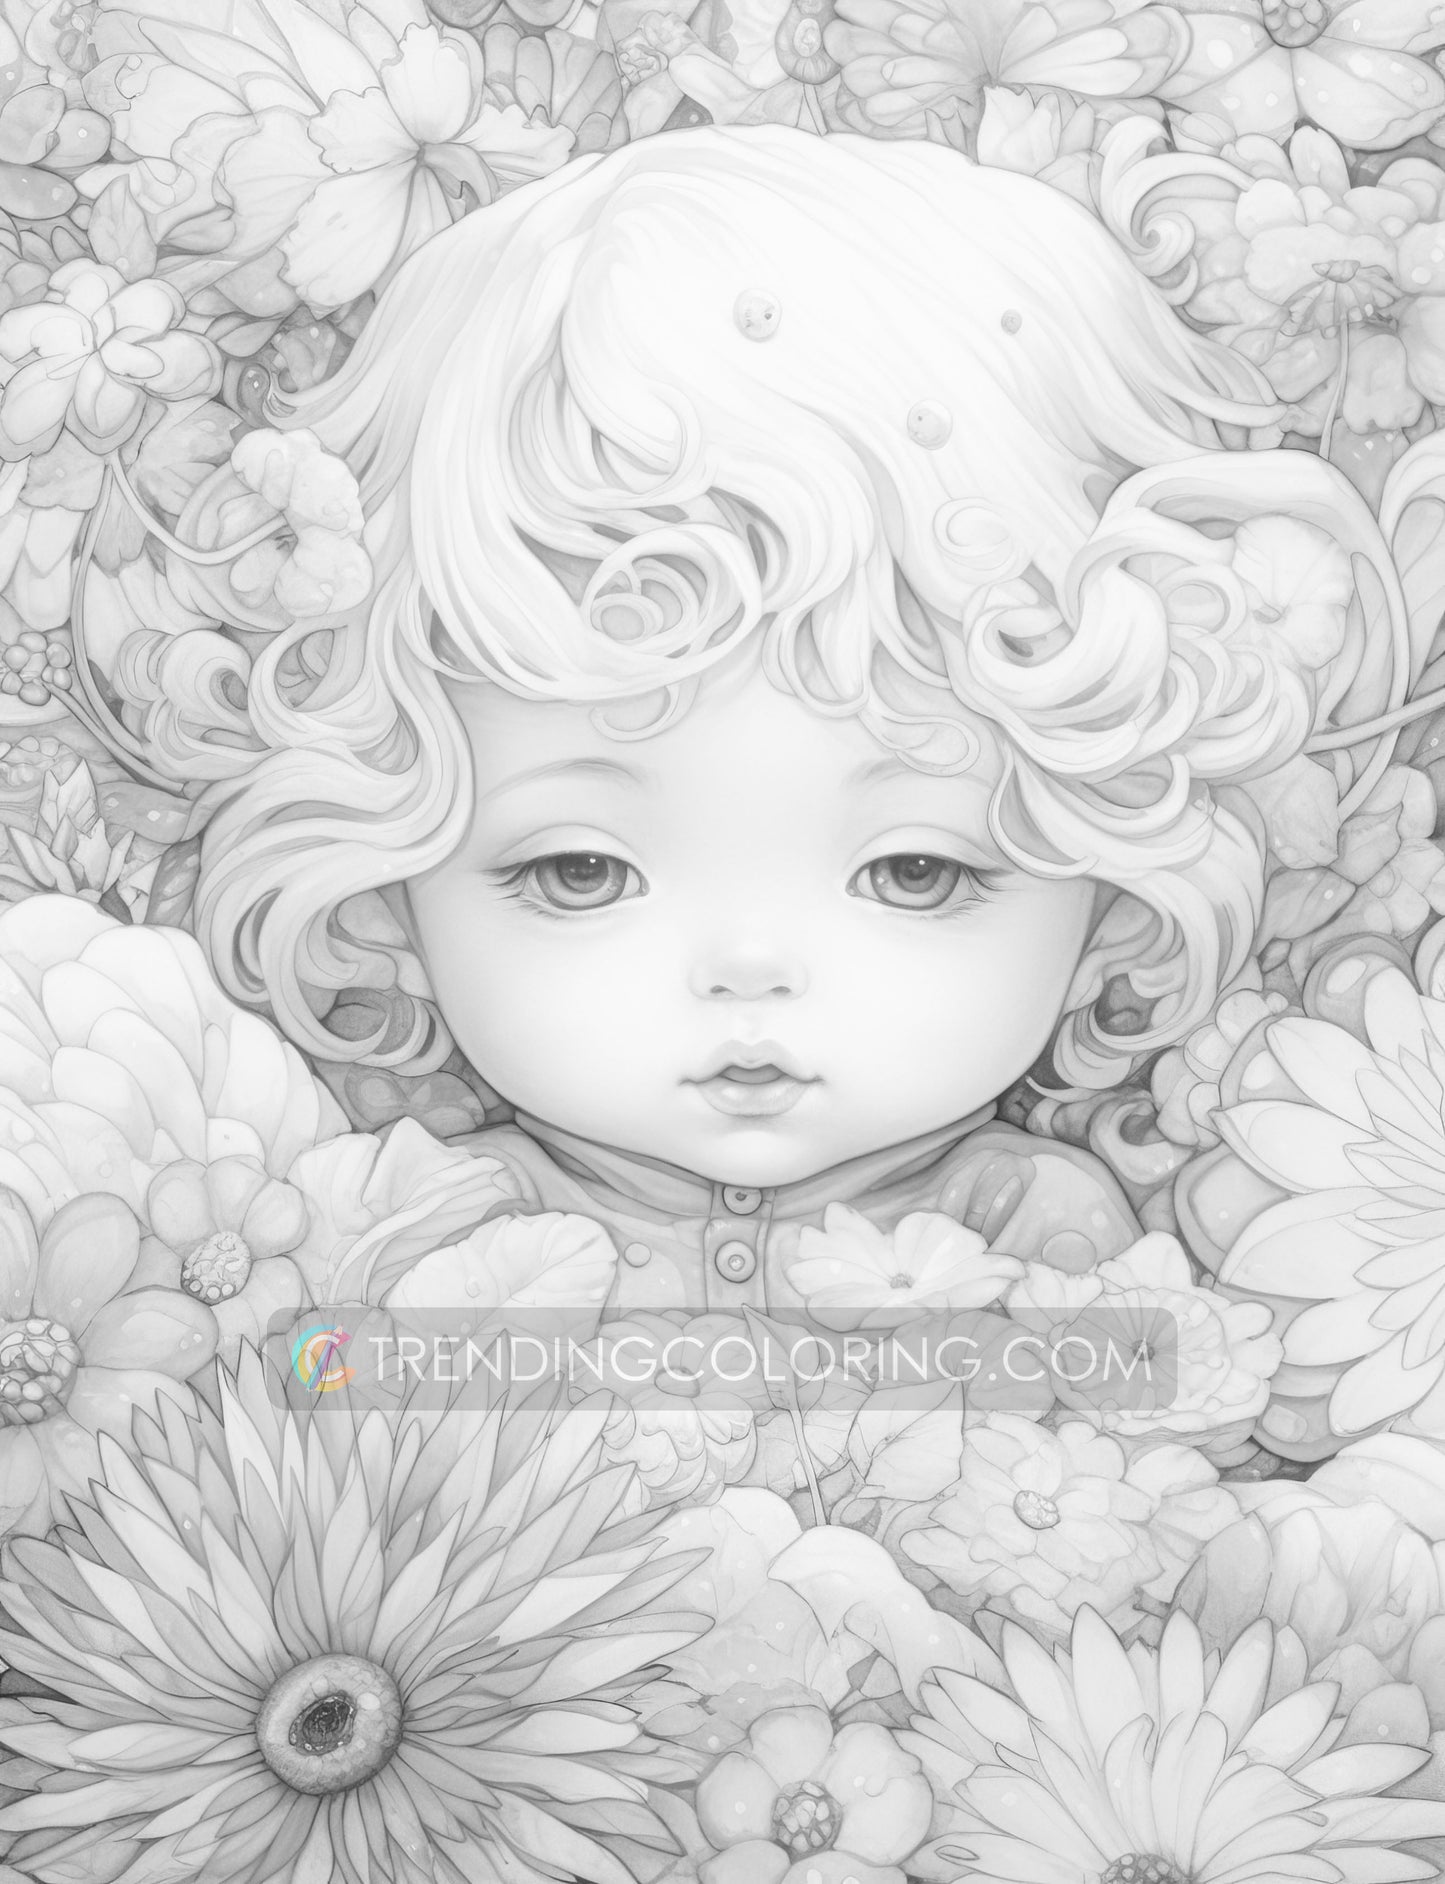 25 Adorable Flower Baby Grayscale Coloring Pages - Instant Download - Printable Dark/Light